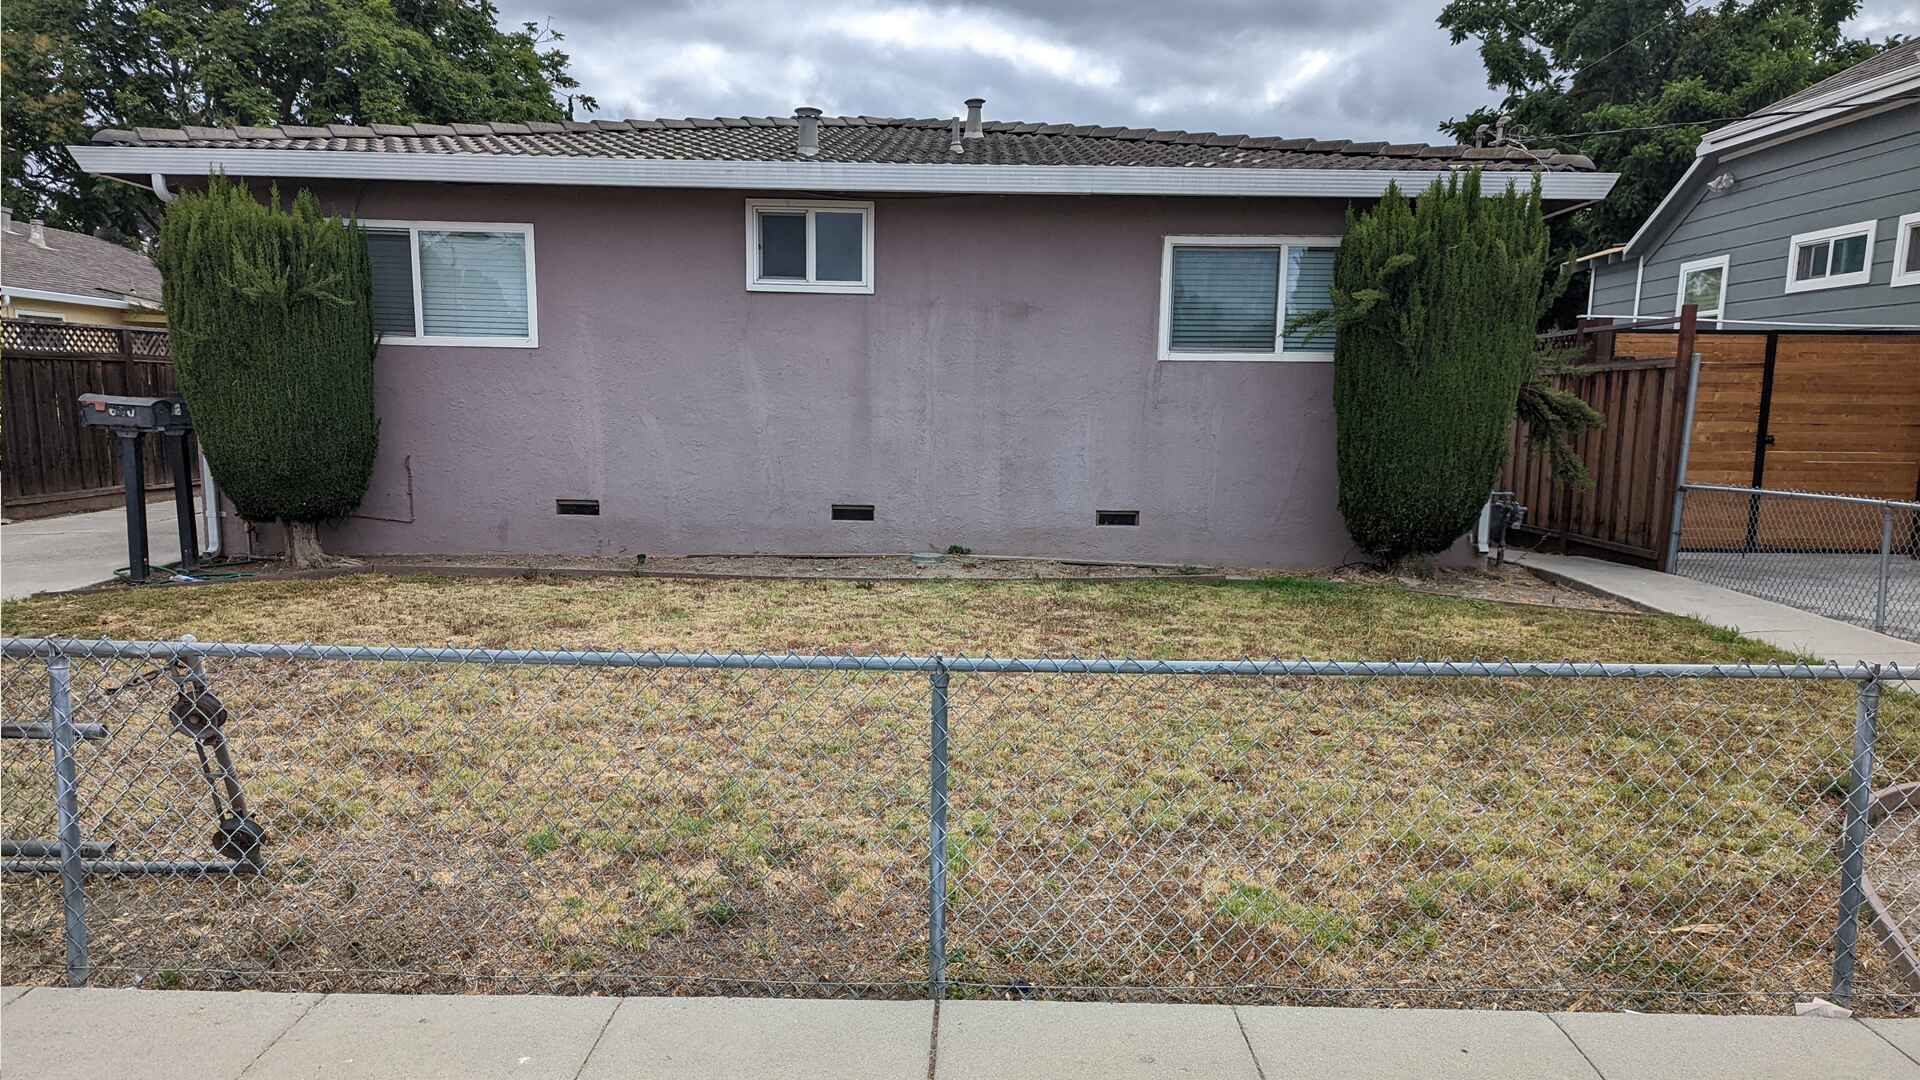 Not-Renovated Barren Front Yard with Dirt and an Old Chain-Link Fence